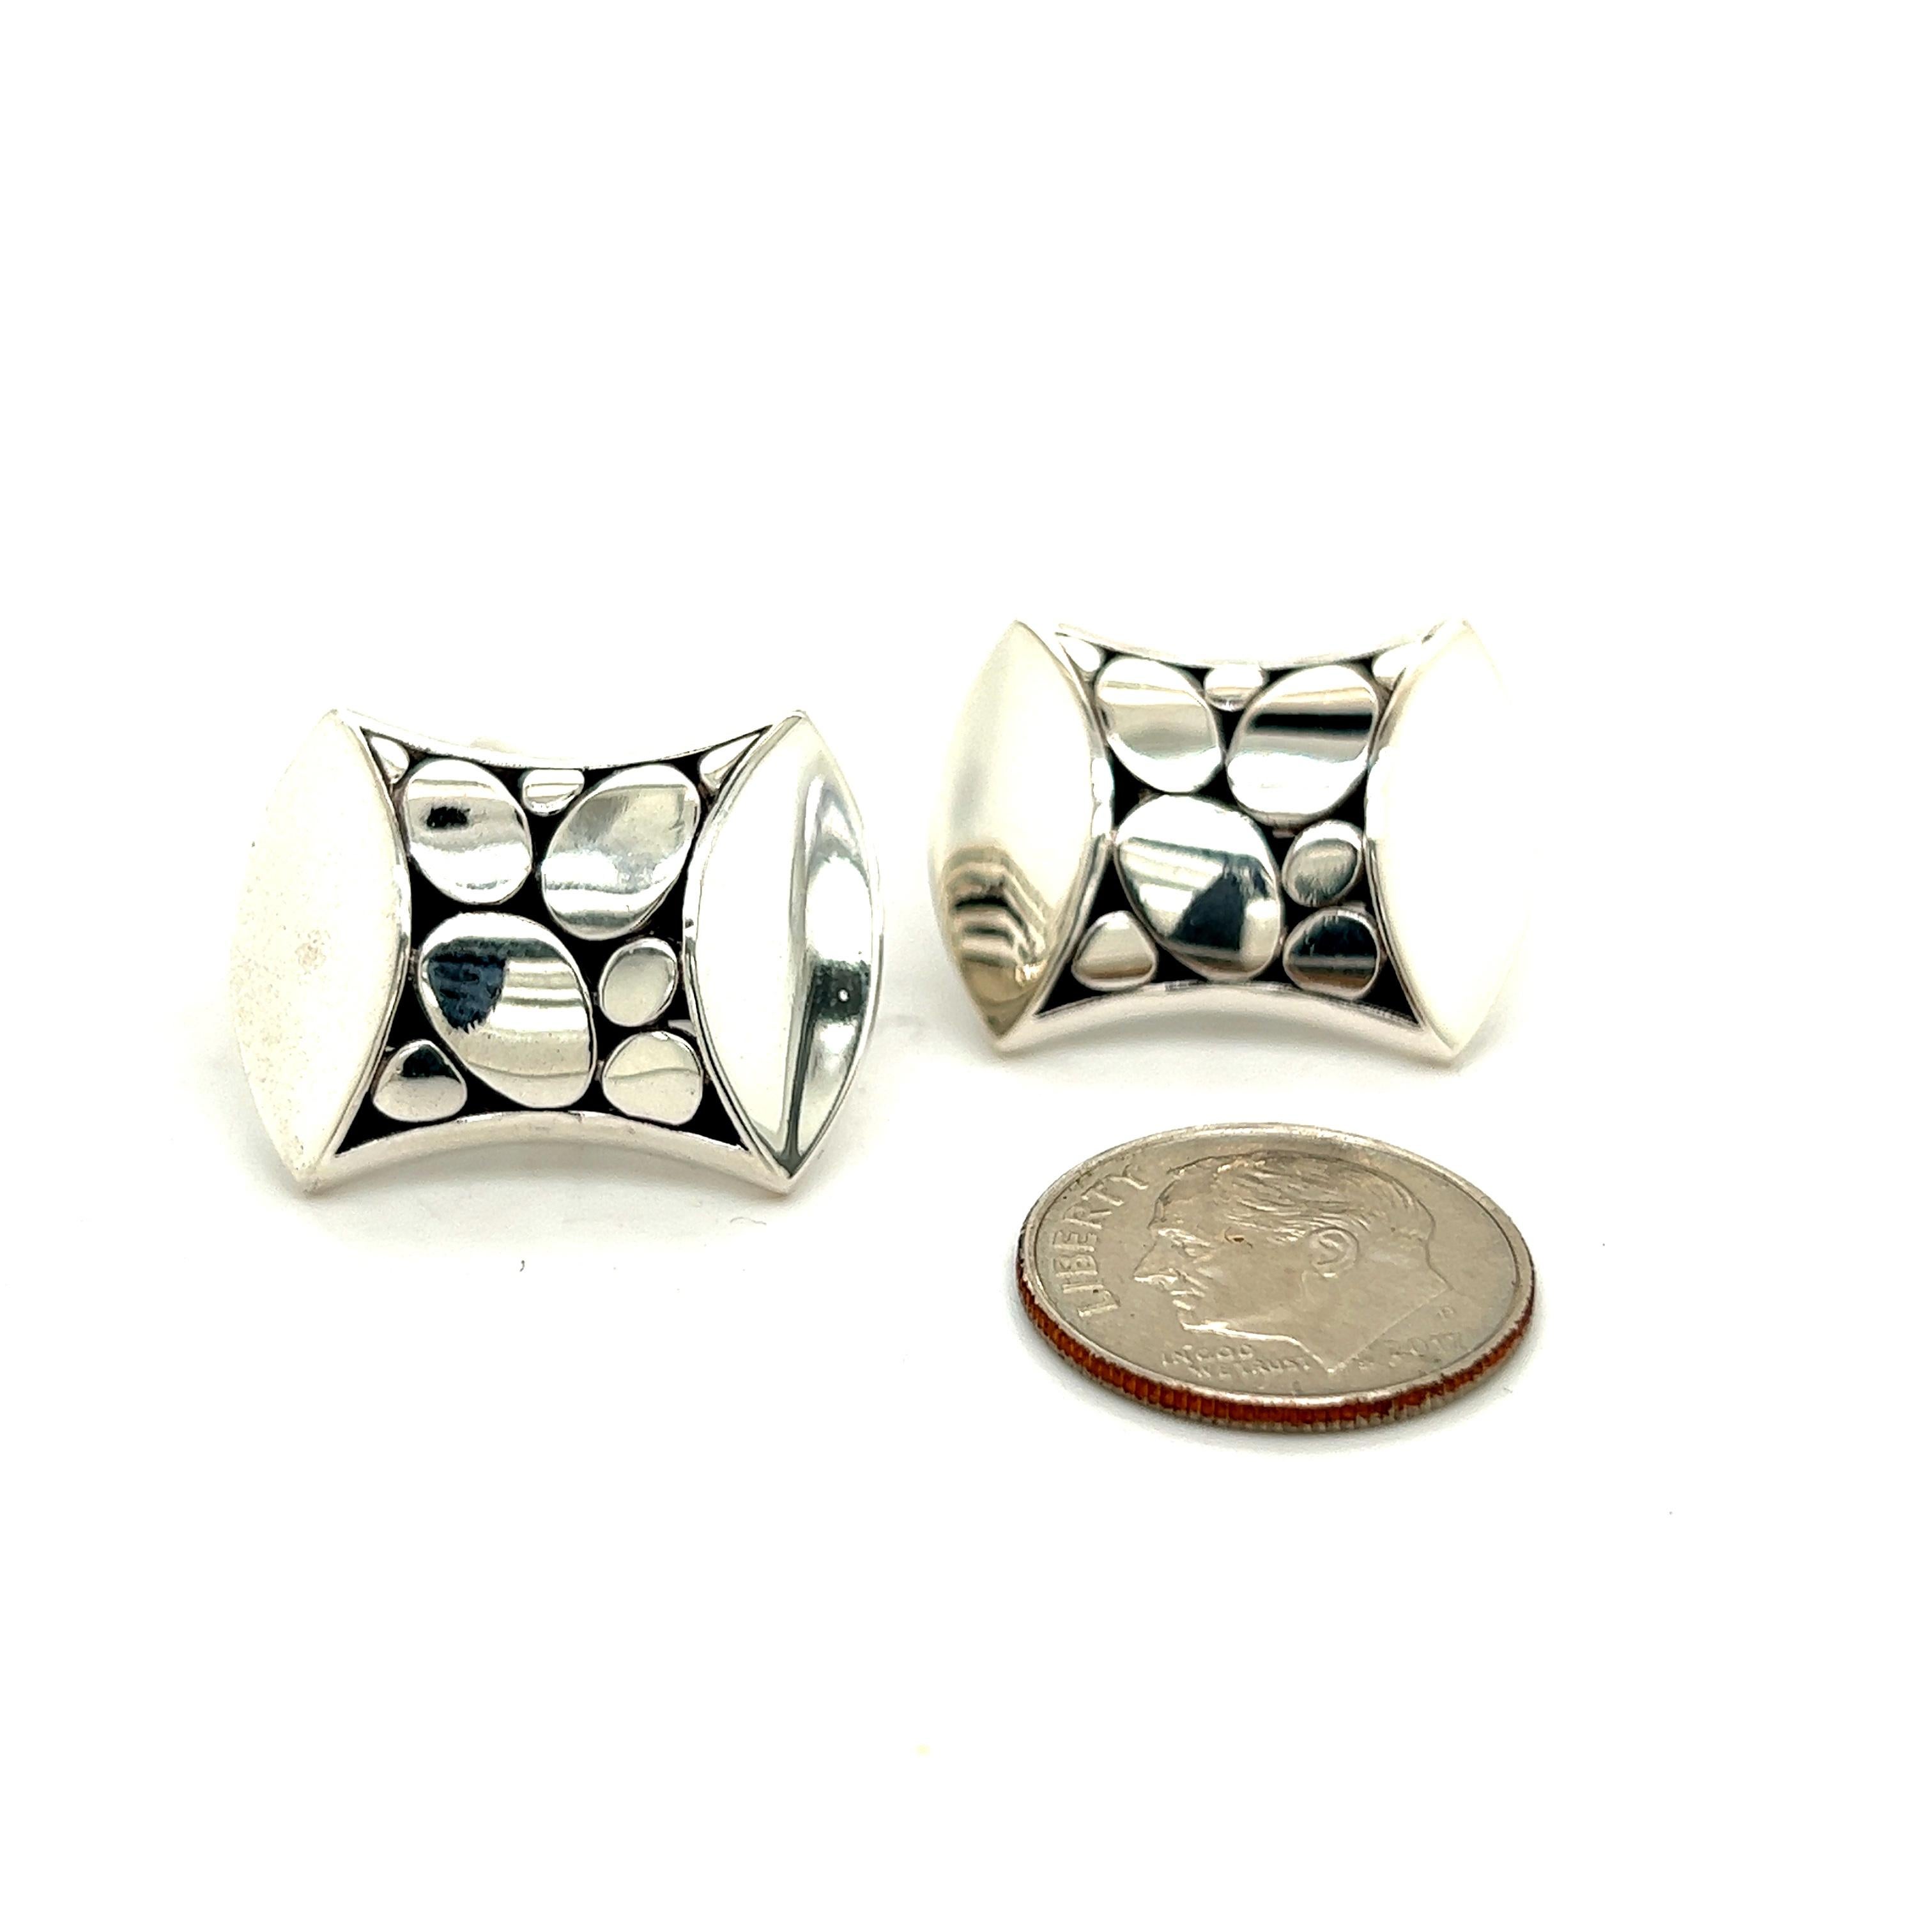 John Hardy Estate Mens Pebble Cufflinks Sterling Silver JH33

TRUSTED SELLER SINCE 2002

PLEASE SEE OUR HUNDREDS OF POSITIVE FEEDBACKS FROM OUR CLIENTS!!

FREE SHIPPING!!

DETAILS
Style: Pebble Cufflinks
Weight: 19.3 Grams
Metal: Sterling